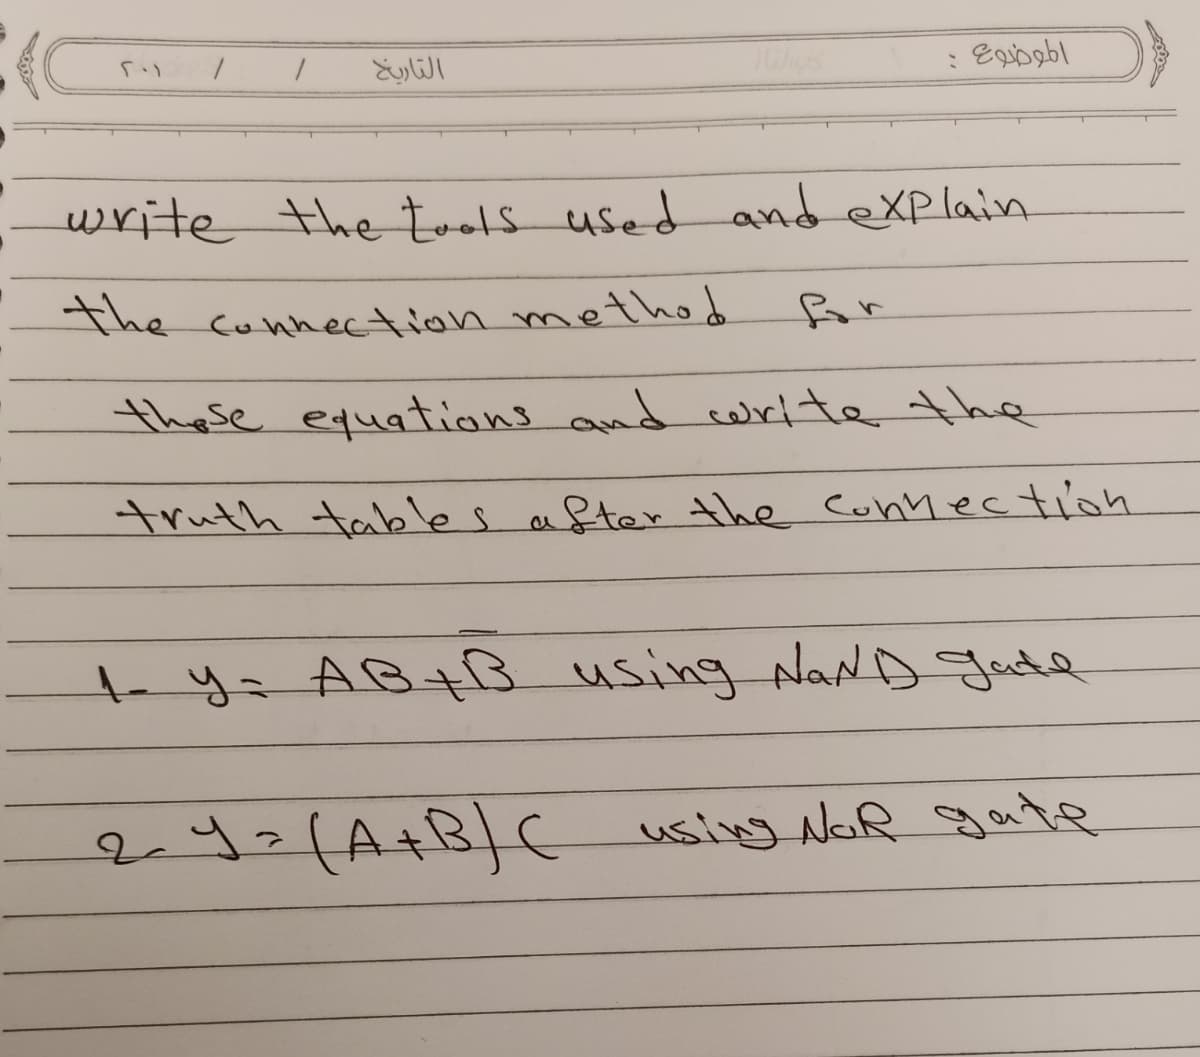 : Epobl
「い
التاريخ
write the tools
used and eXP lain
The connection method
or
these equations and corite the
truth tables a
Ster the cConnection
t-y= ABt using NaND gutl
NAND gate
usiy NaR gate
